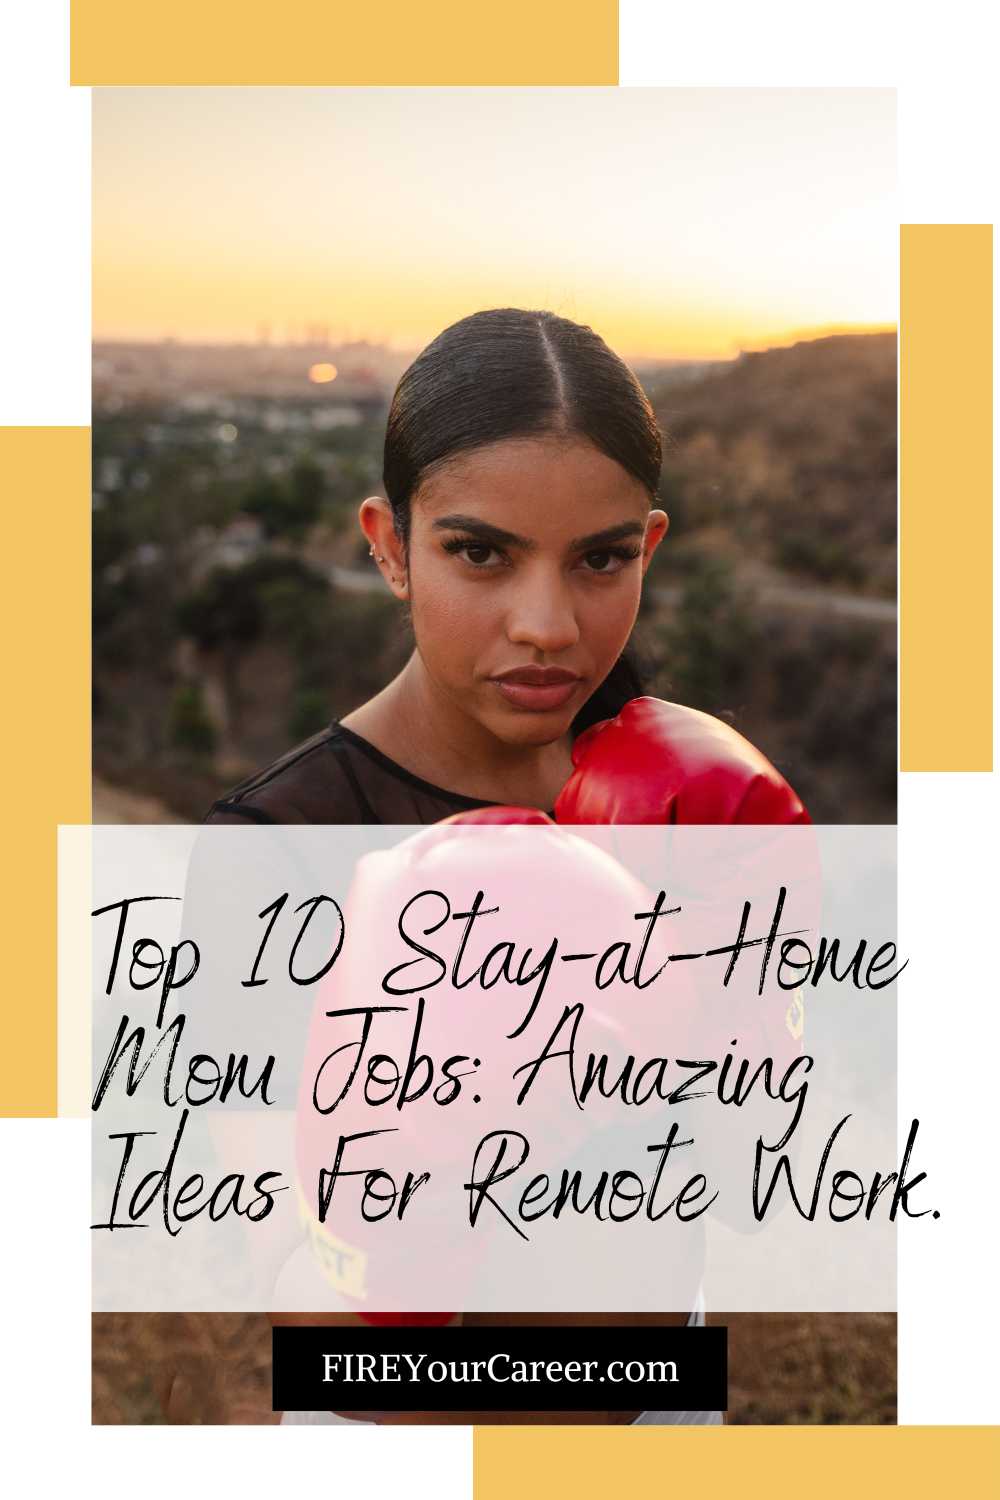 Top 10 Stay-at-Home Mom Jobs Amazing Ideas For Remote Work. I've Done #2, 5, 6, And 8! Pinterest